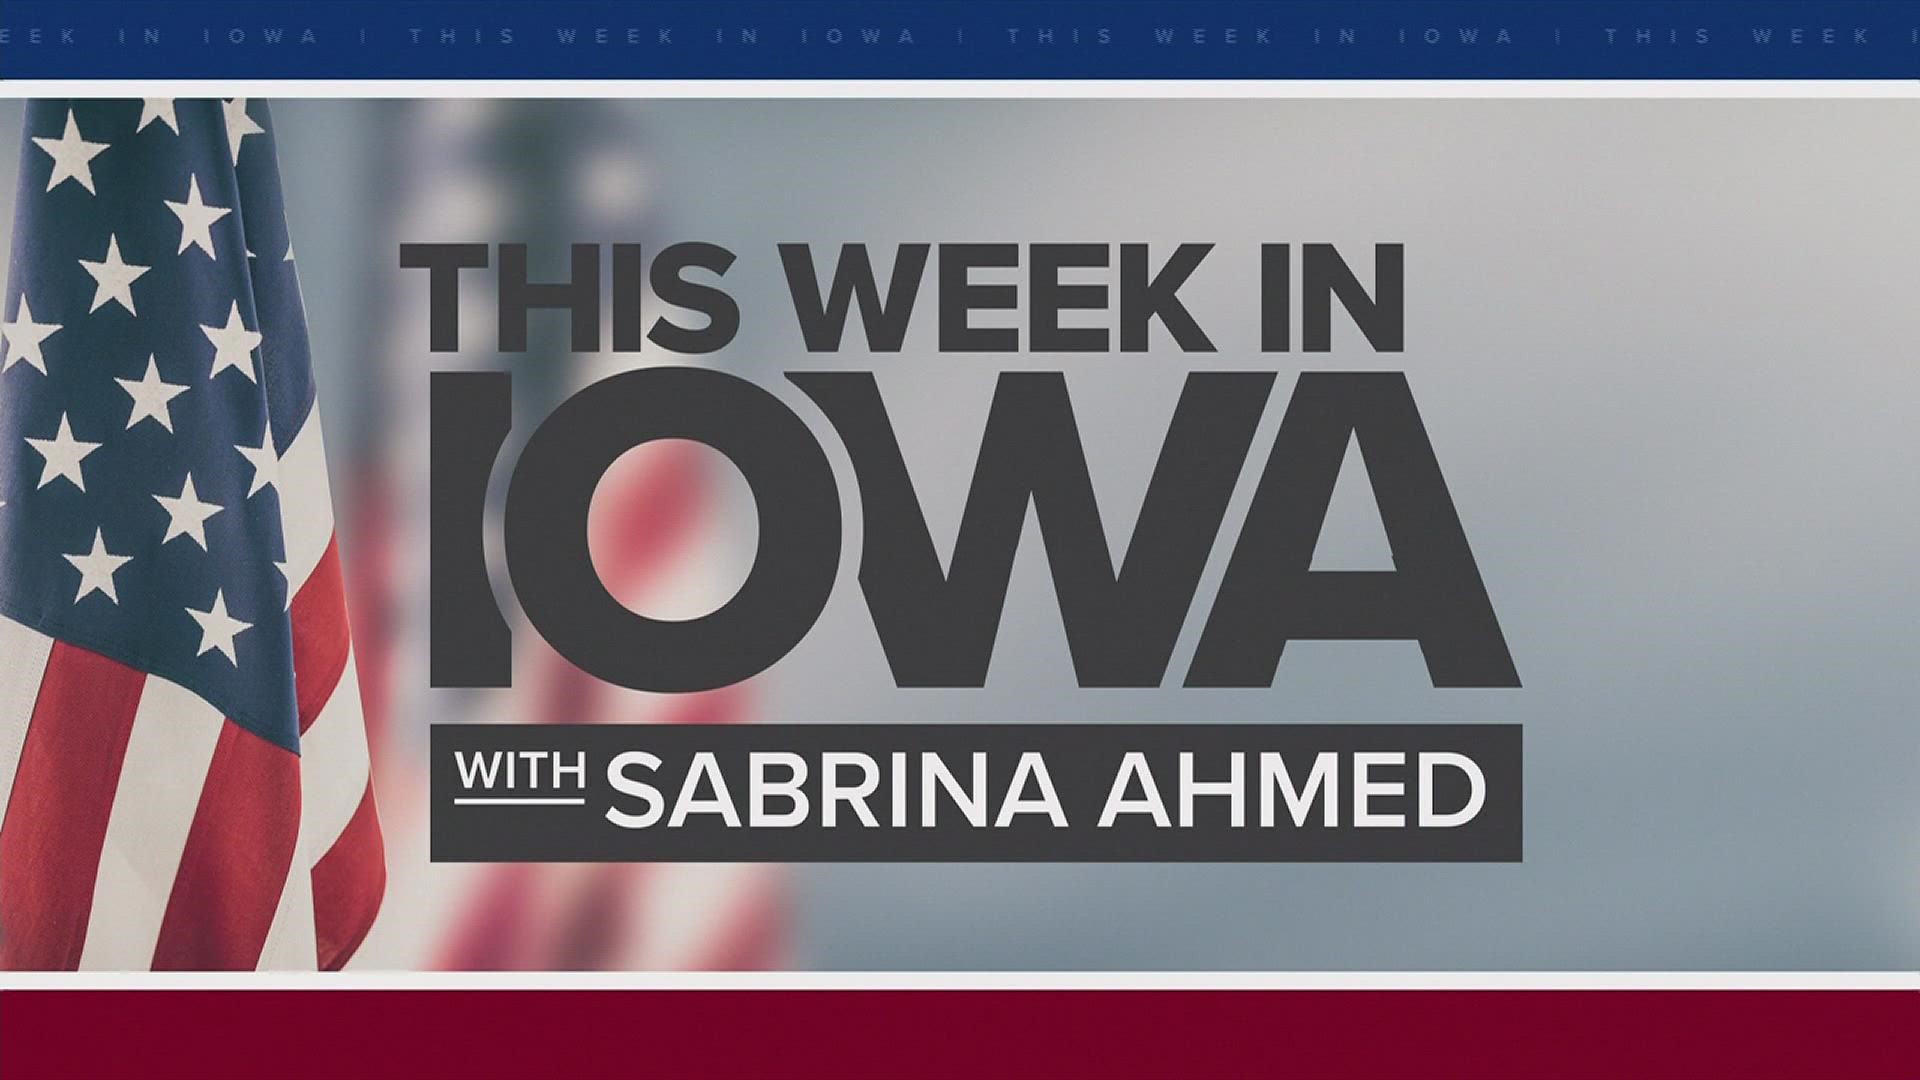 Des Moines City Council elections are just around the corner. This week Sabrina Ahmed sits down with candidates to break down the big issues on voters' minds.